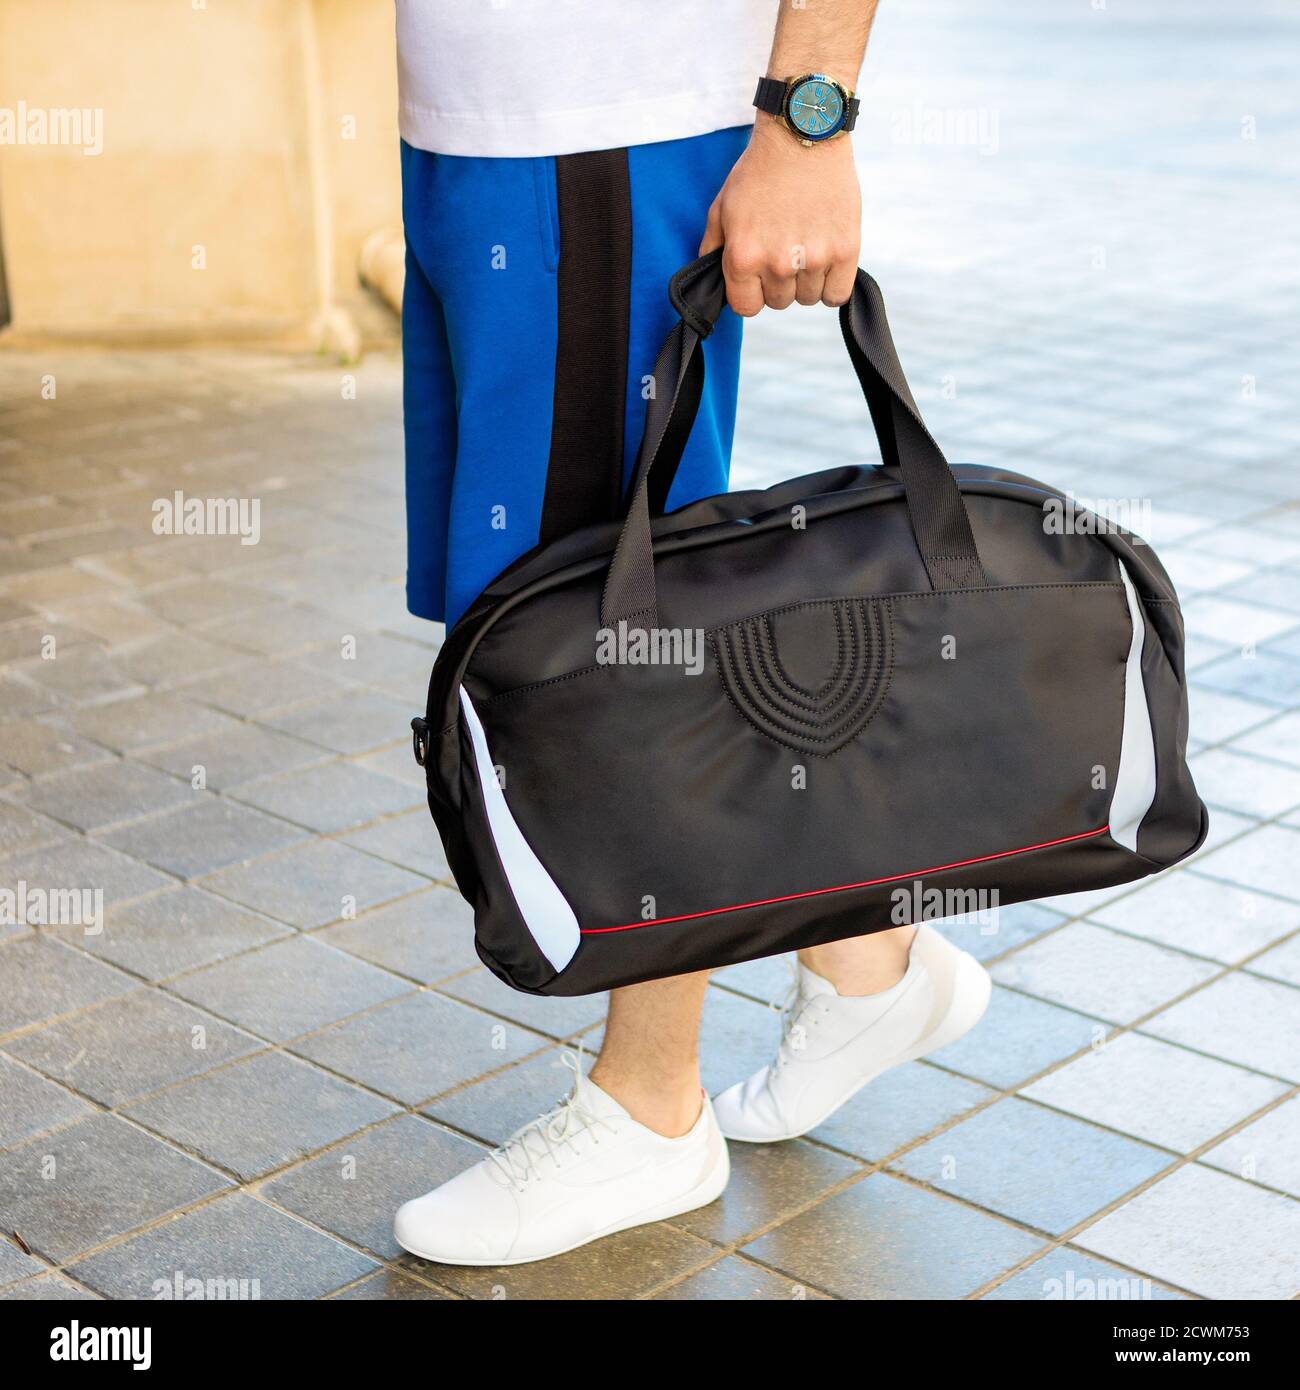 Young man holding a black sport bag close up Stock Photo